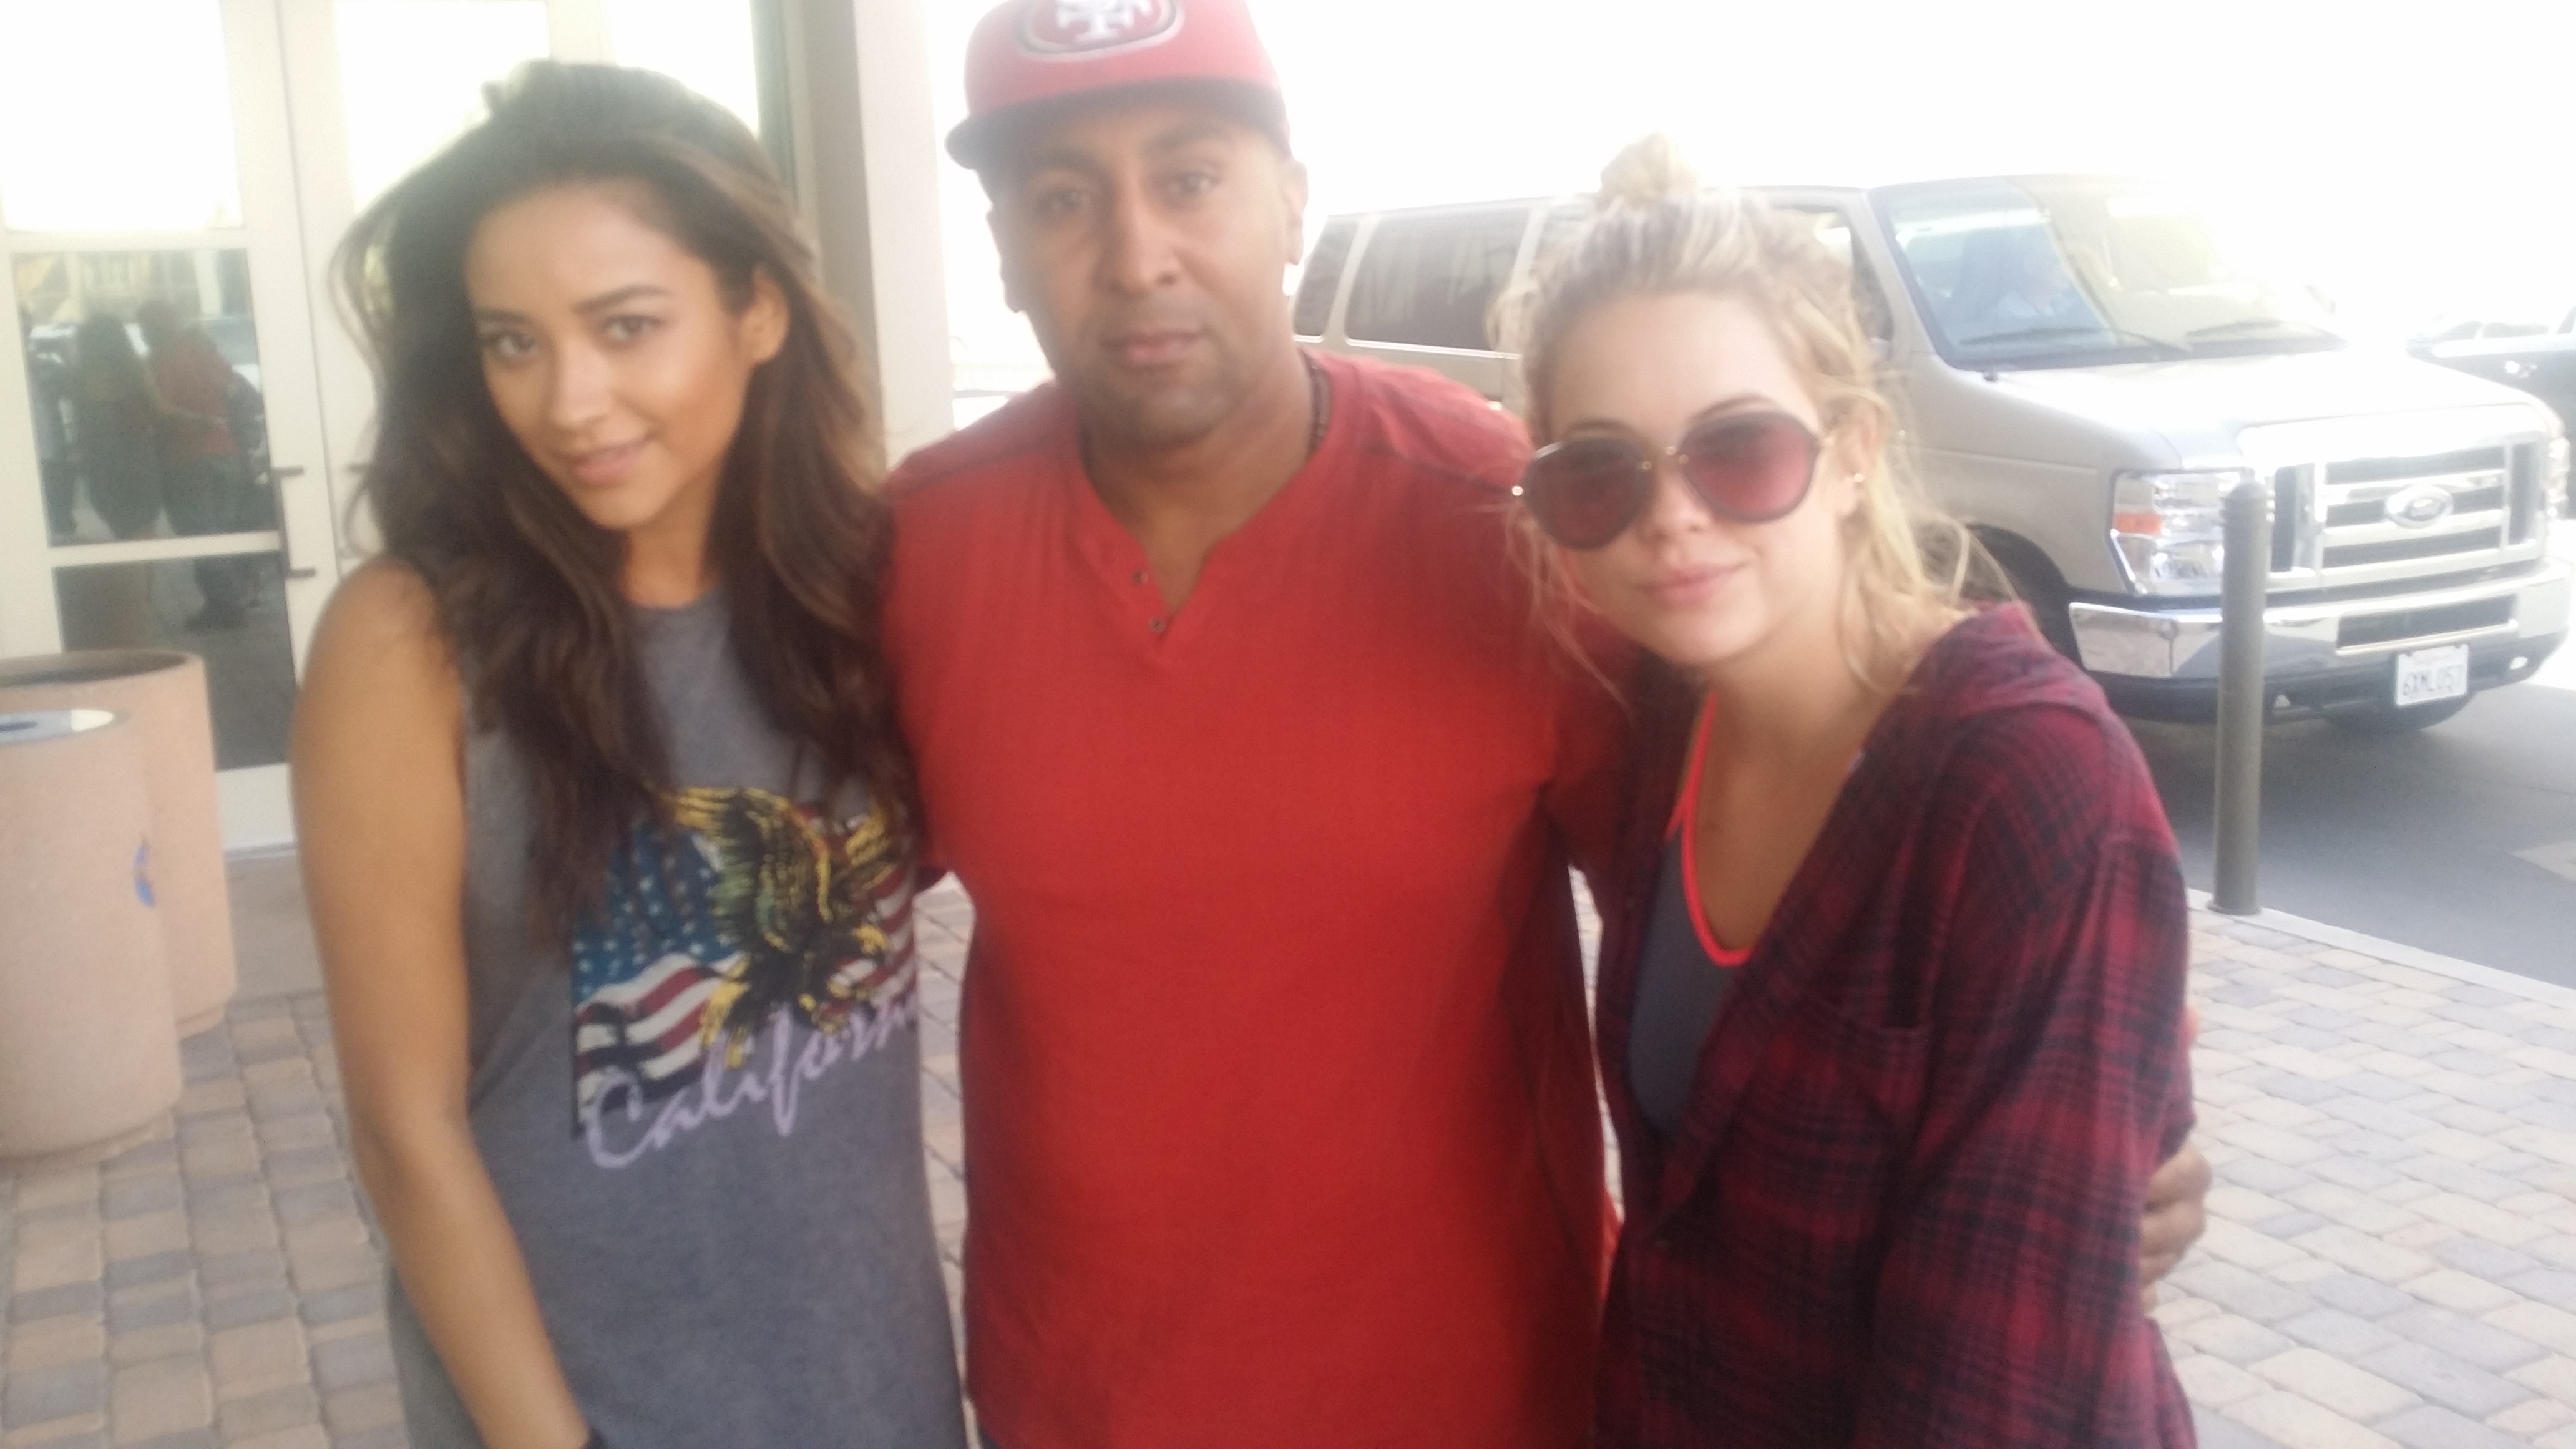 Shay Mitchell, Exie Booker, Ashley Benson table read Pretty little liars